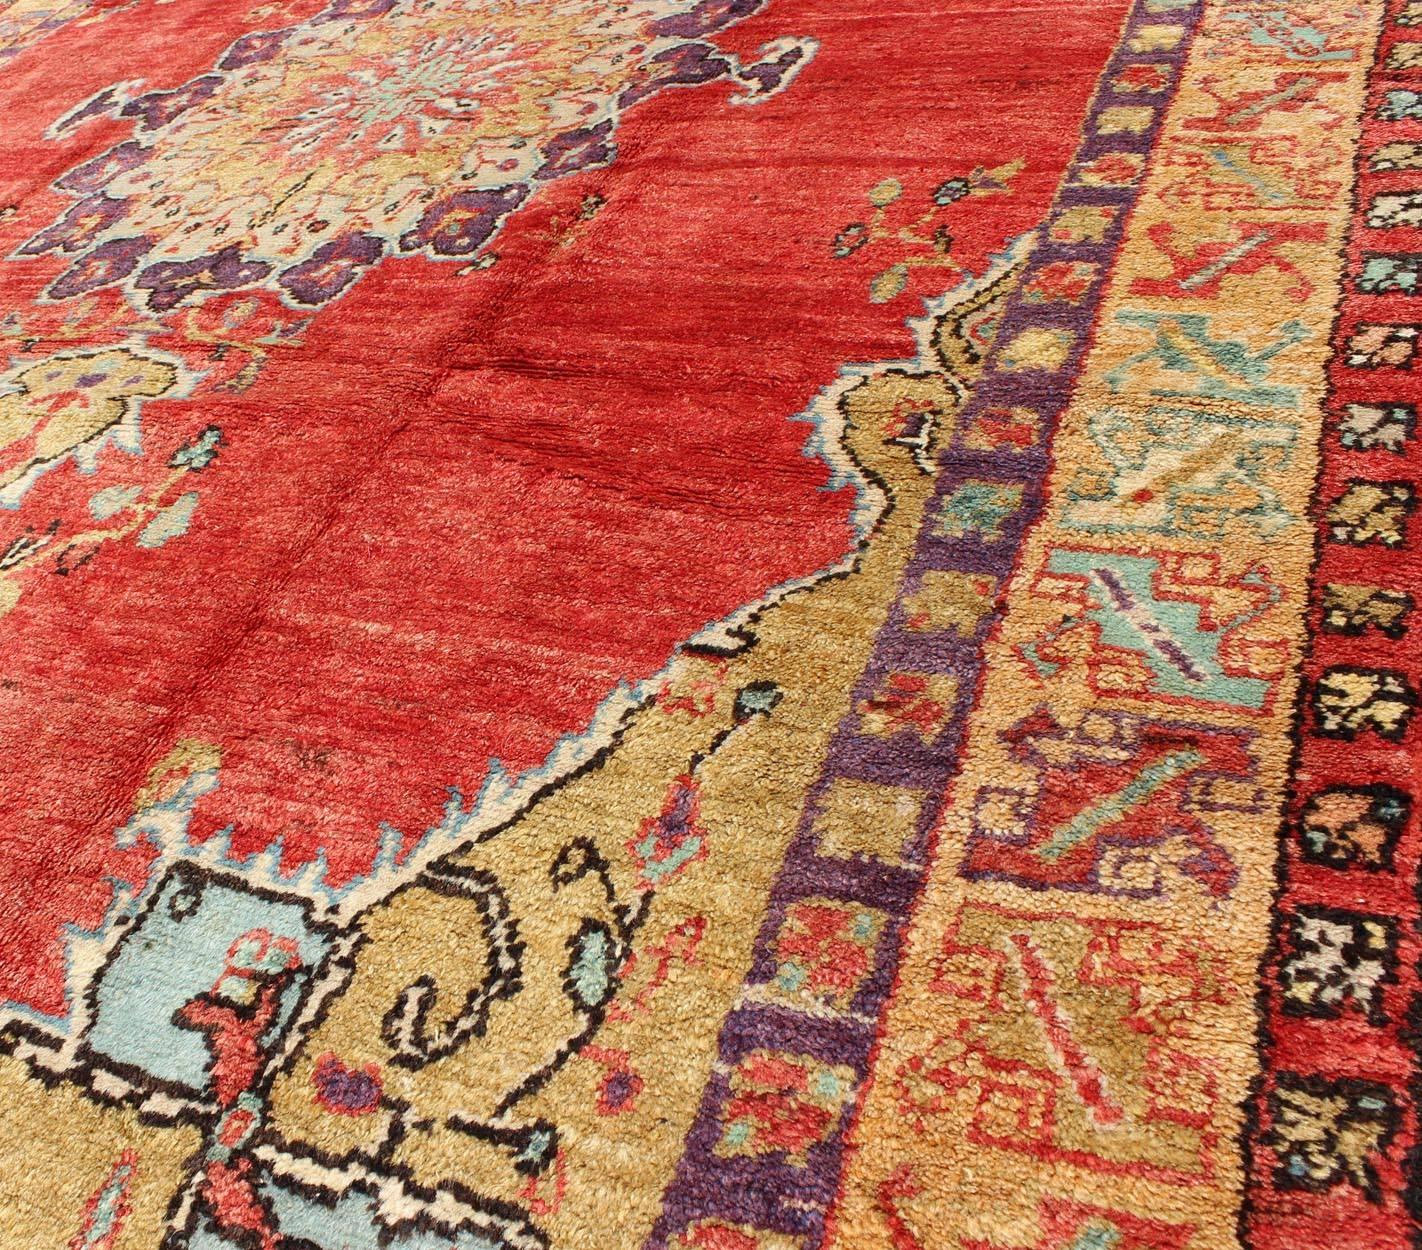 Wool Colorful Vintage Turkish Oushak Rug with Red, Brown and Gold Colors